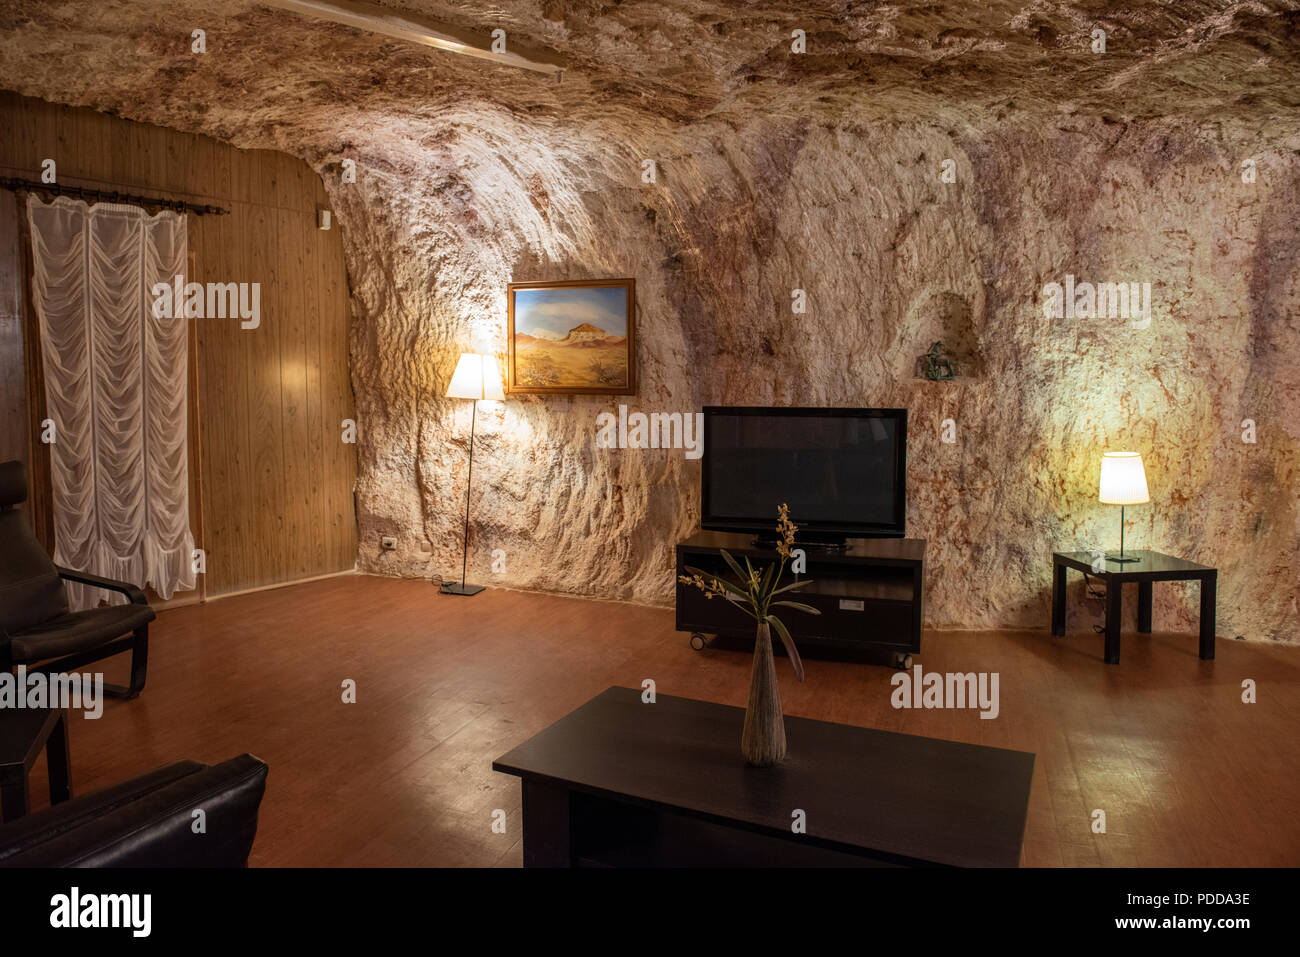 Australia, South Australia, Coober Pedy. Home to one of the richest opal fields in the world. Umoona Opal Mine & Museum. Typical underground home, liv Stock Photo